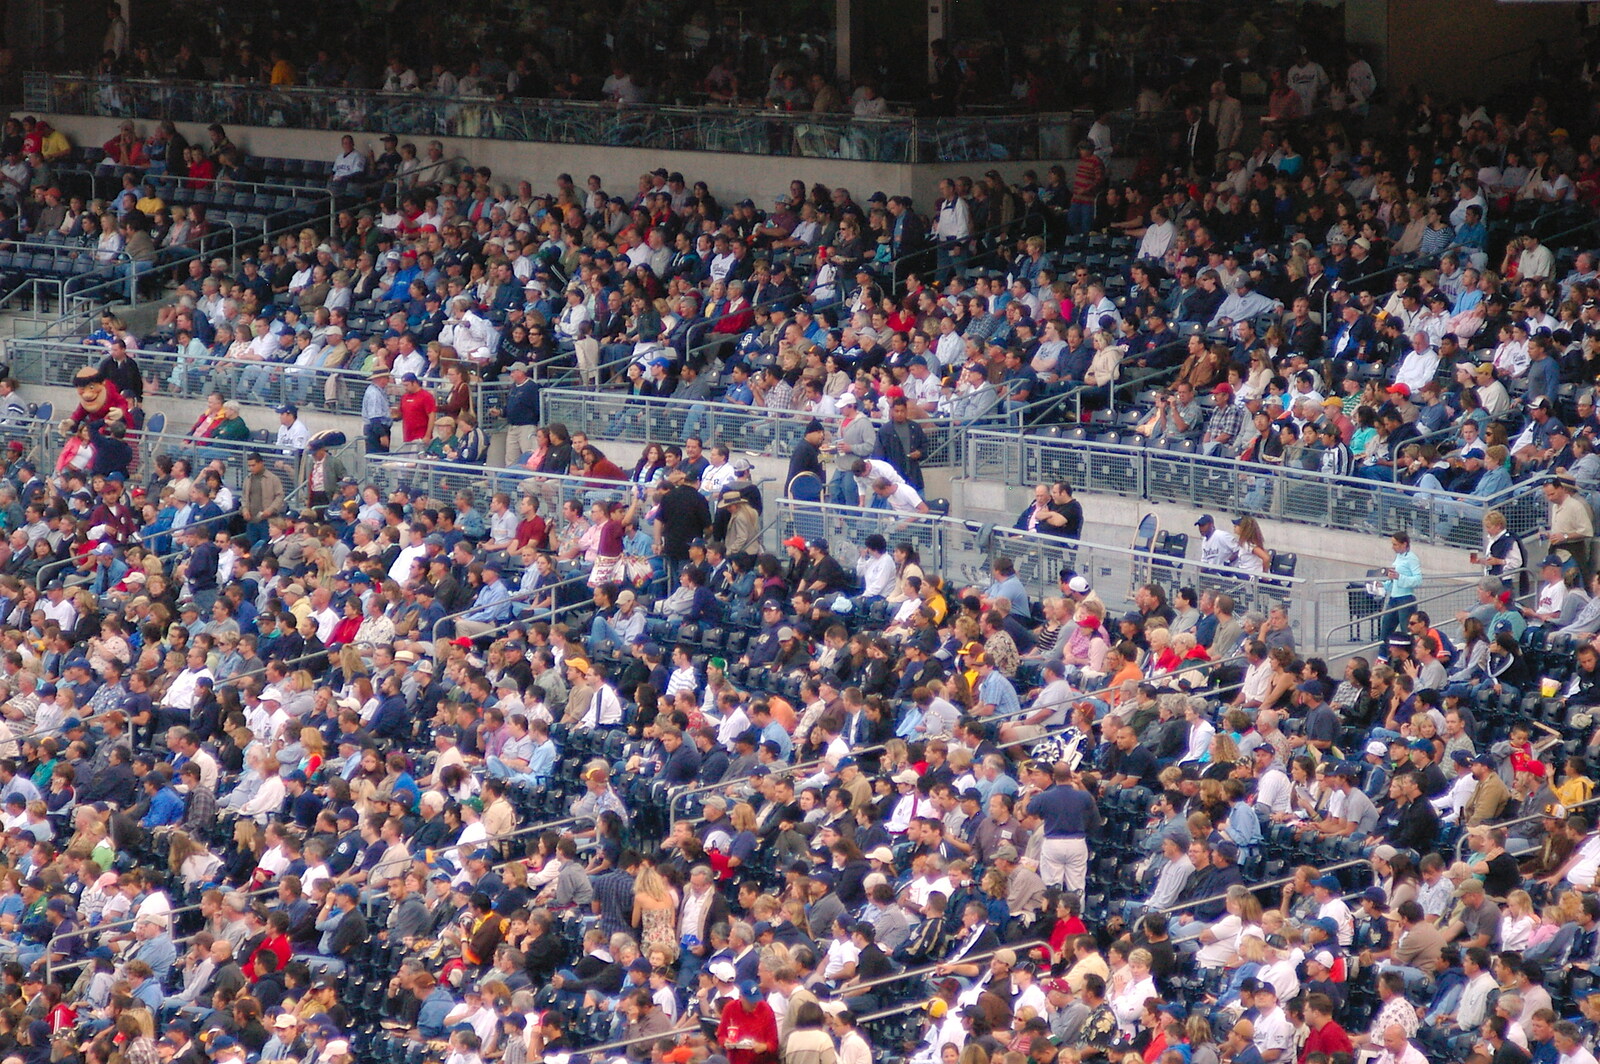 The crowds are ready for the game from The Padres at Petco Park: a Baseball Game, San Diego, California - 31st May 2005